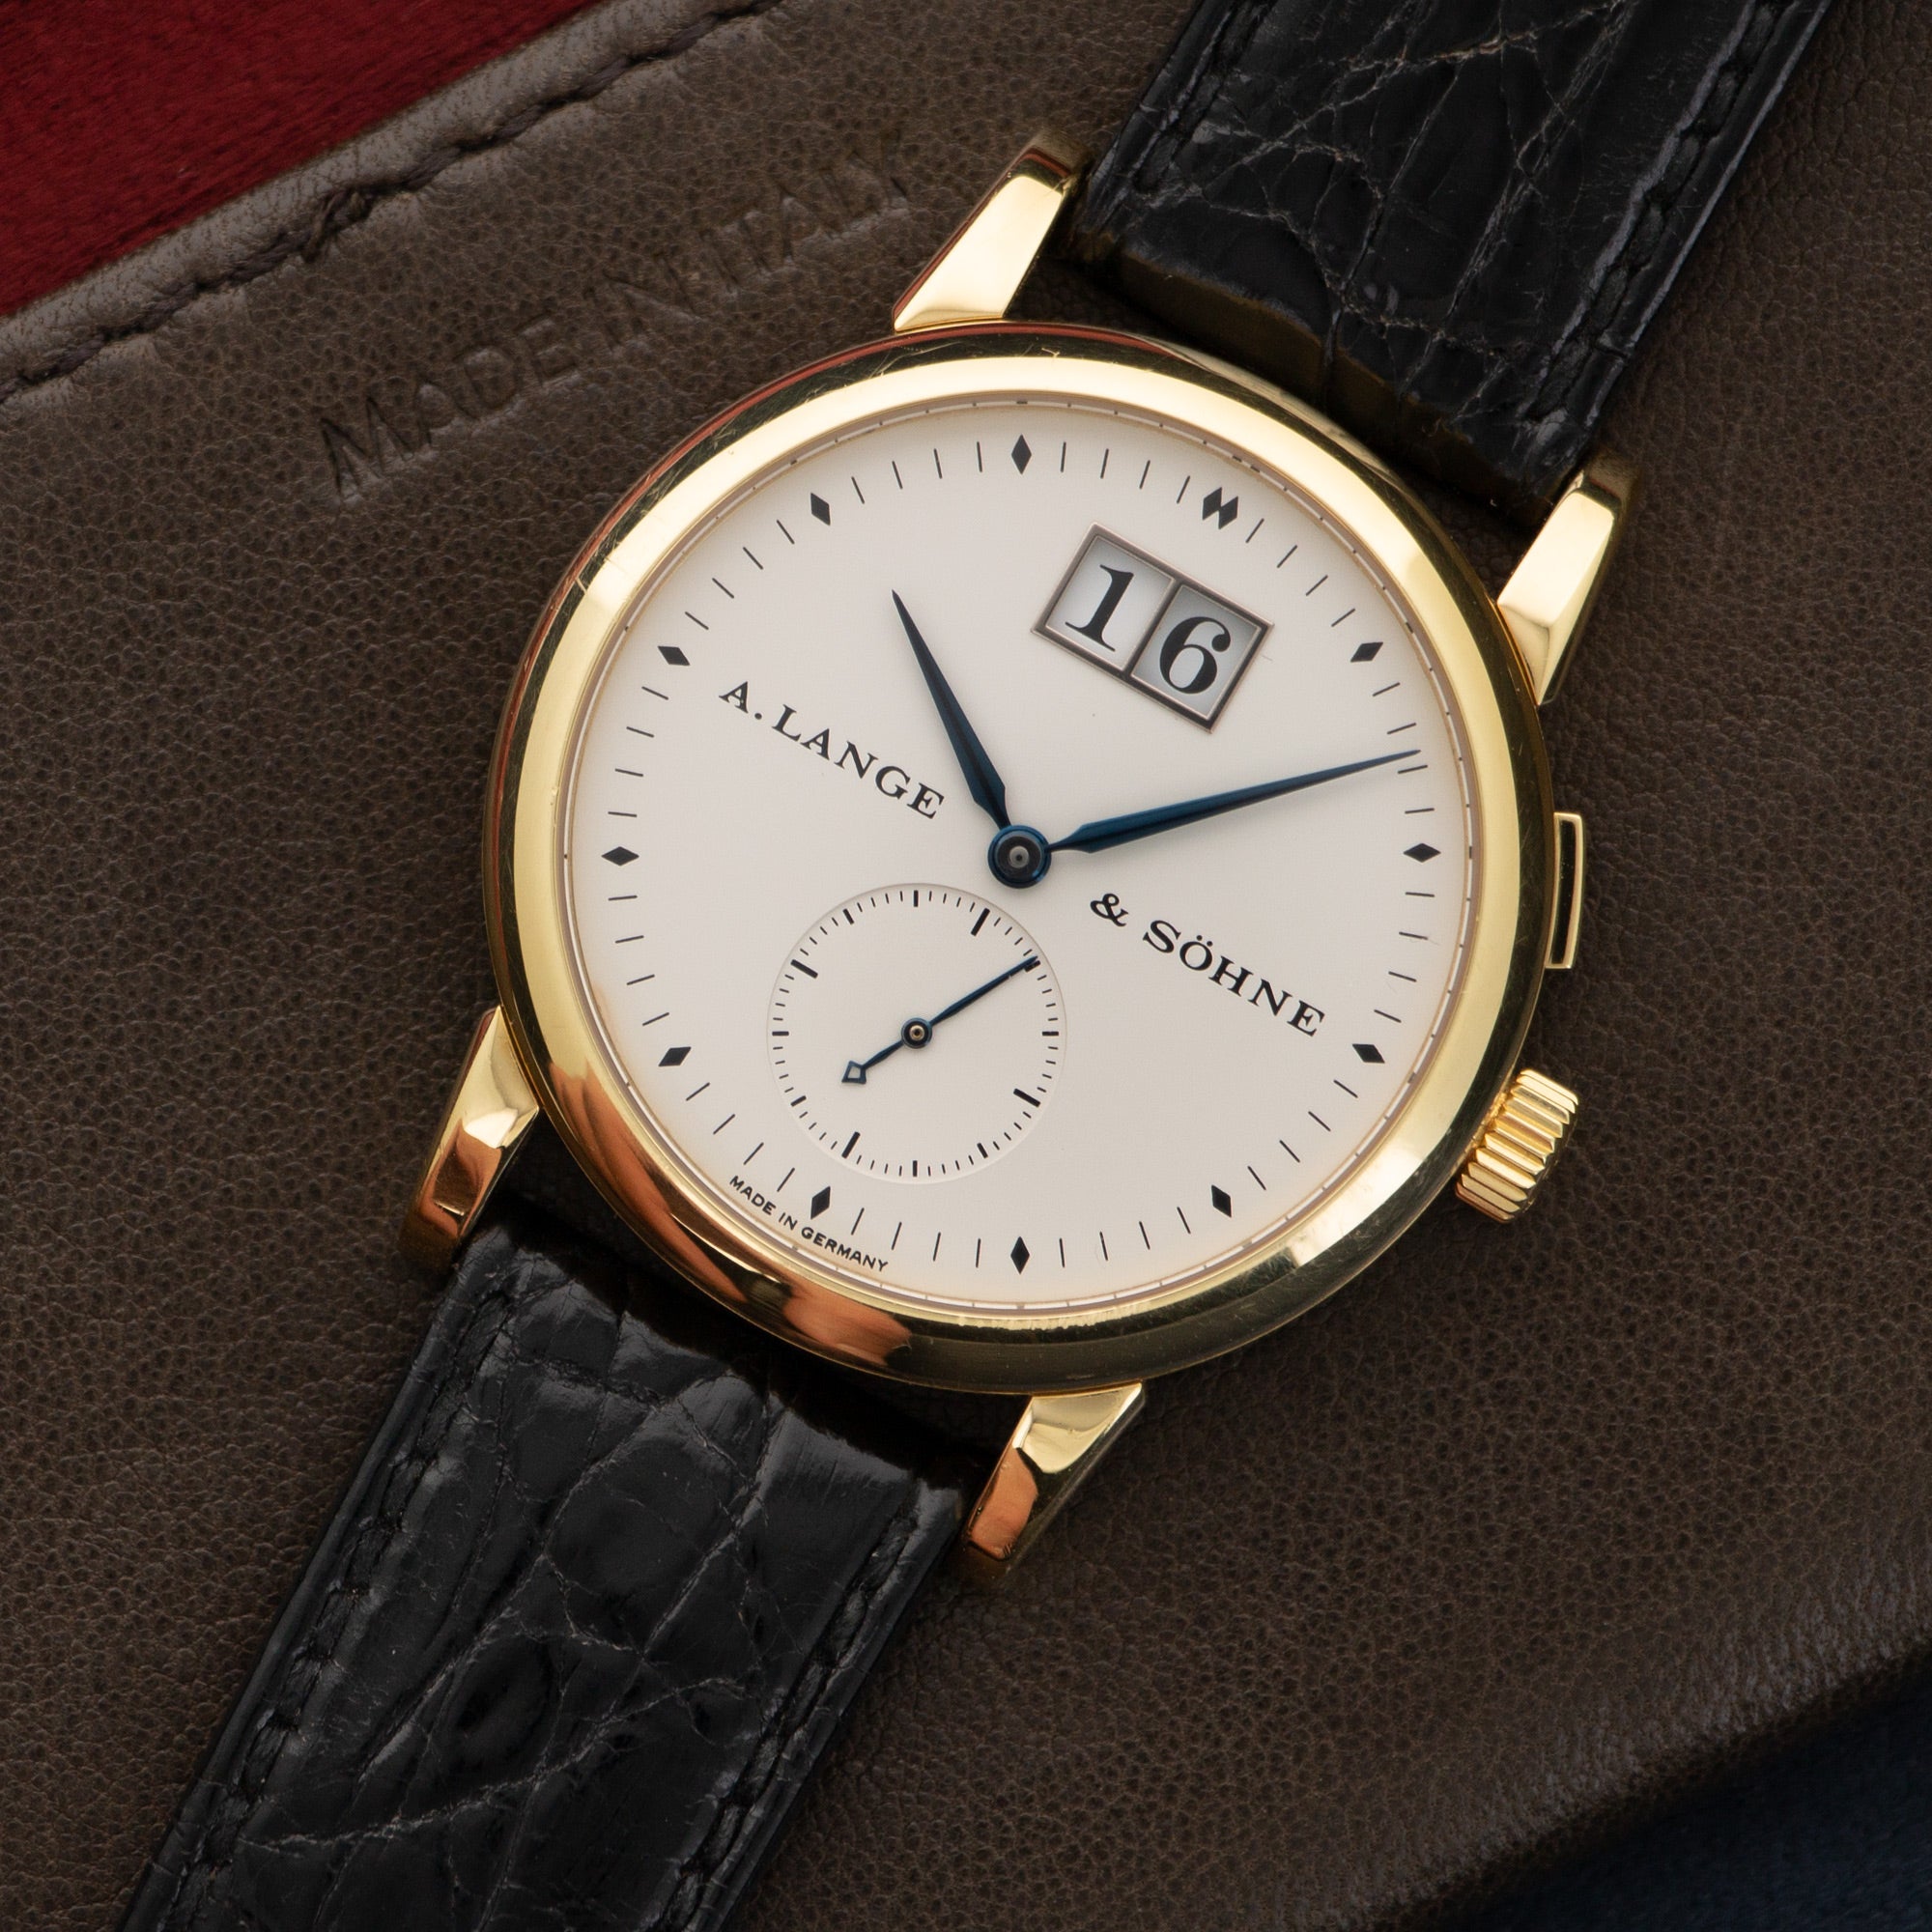 A. Lange & Sohne - A. Lange & Sohne Yellow Gold Saxonia 1st Series Watch Ref. 102.002 - The Keystone Watches